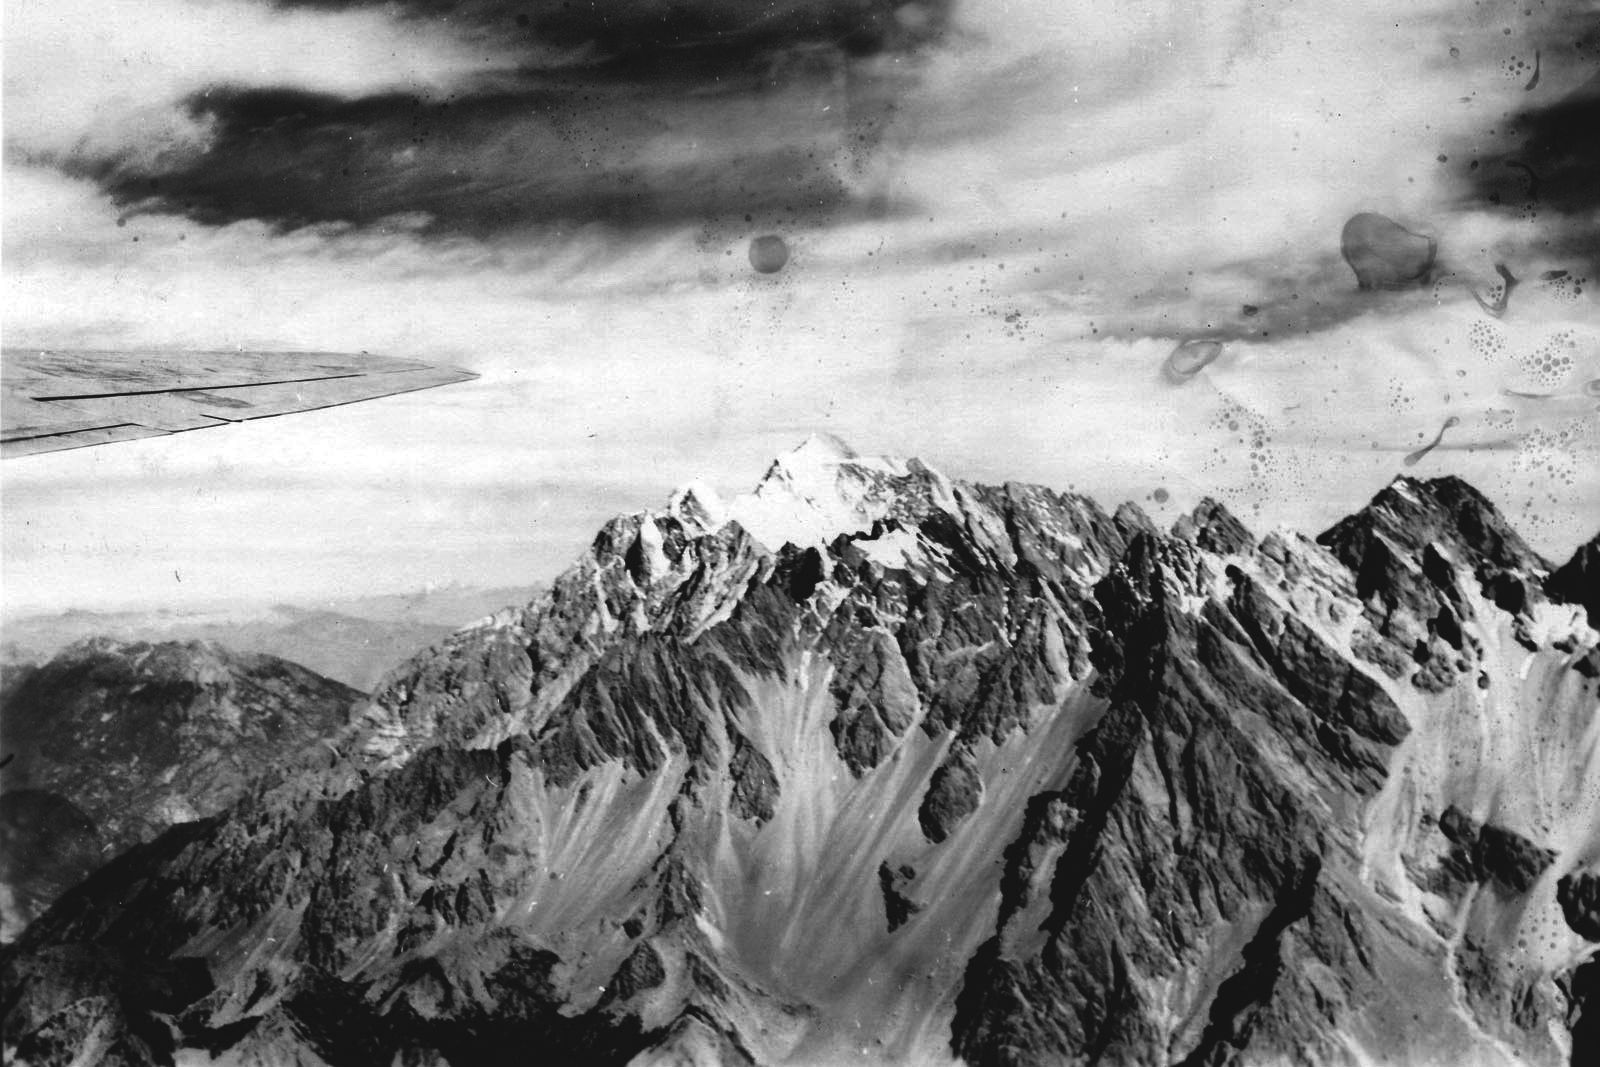 This majestic photo of the Himalayas, taken from a window of a Douglas C-47 transport plane, also portrays the treacherous nature of the flights across the world’s tallest mountain range from India to China. Allied planes used the air bridge when Japanese troops cut land routes.